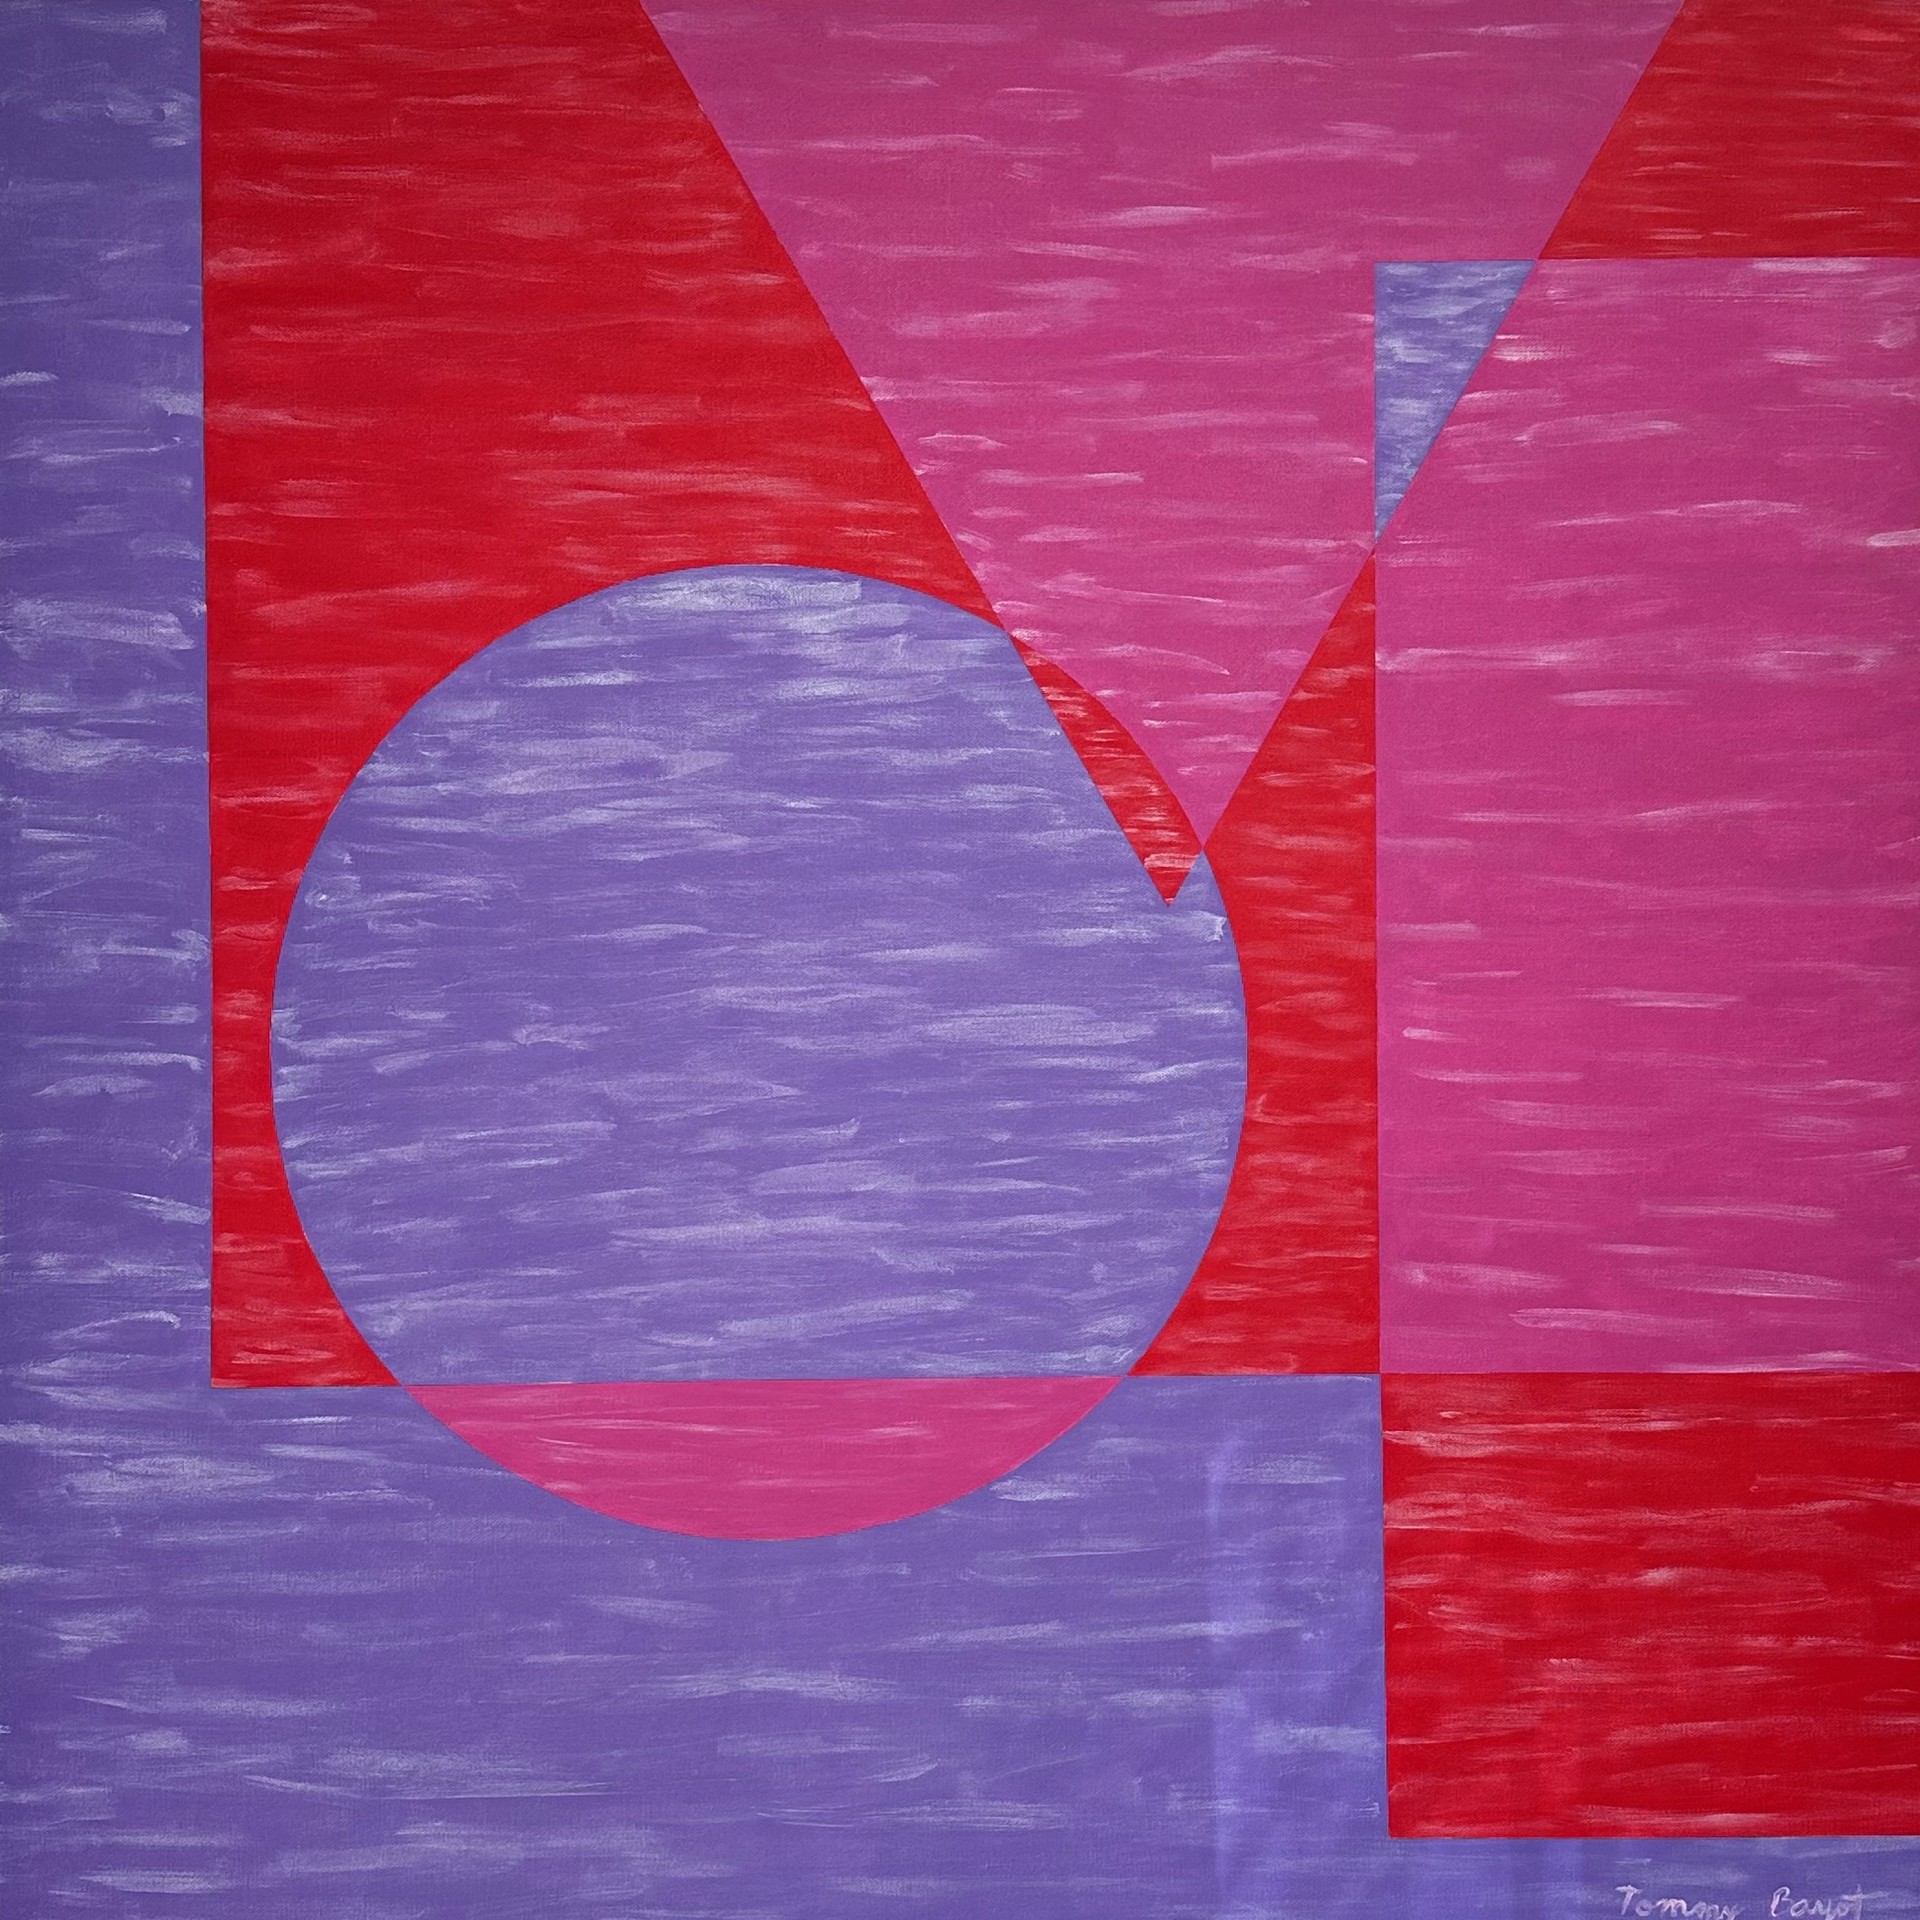 Between Shapes & Colors No. 8 (LOVE) by Tommy Bayot